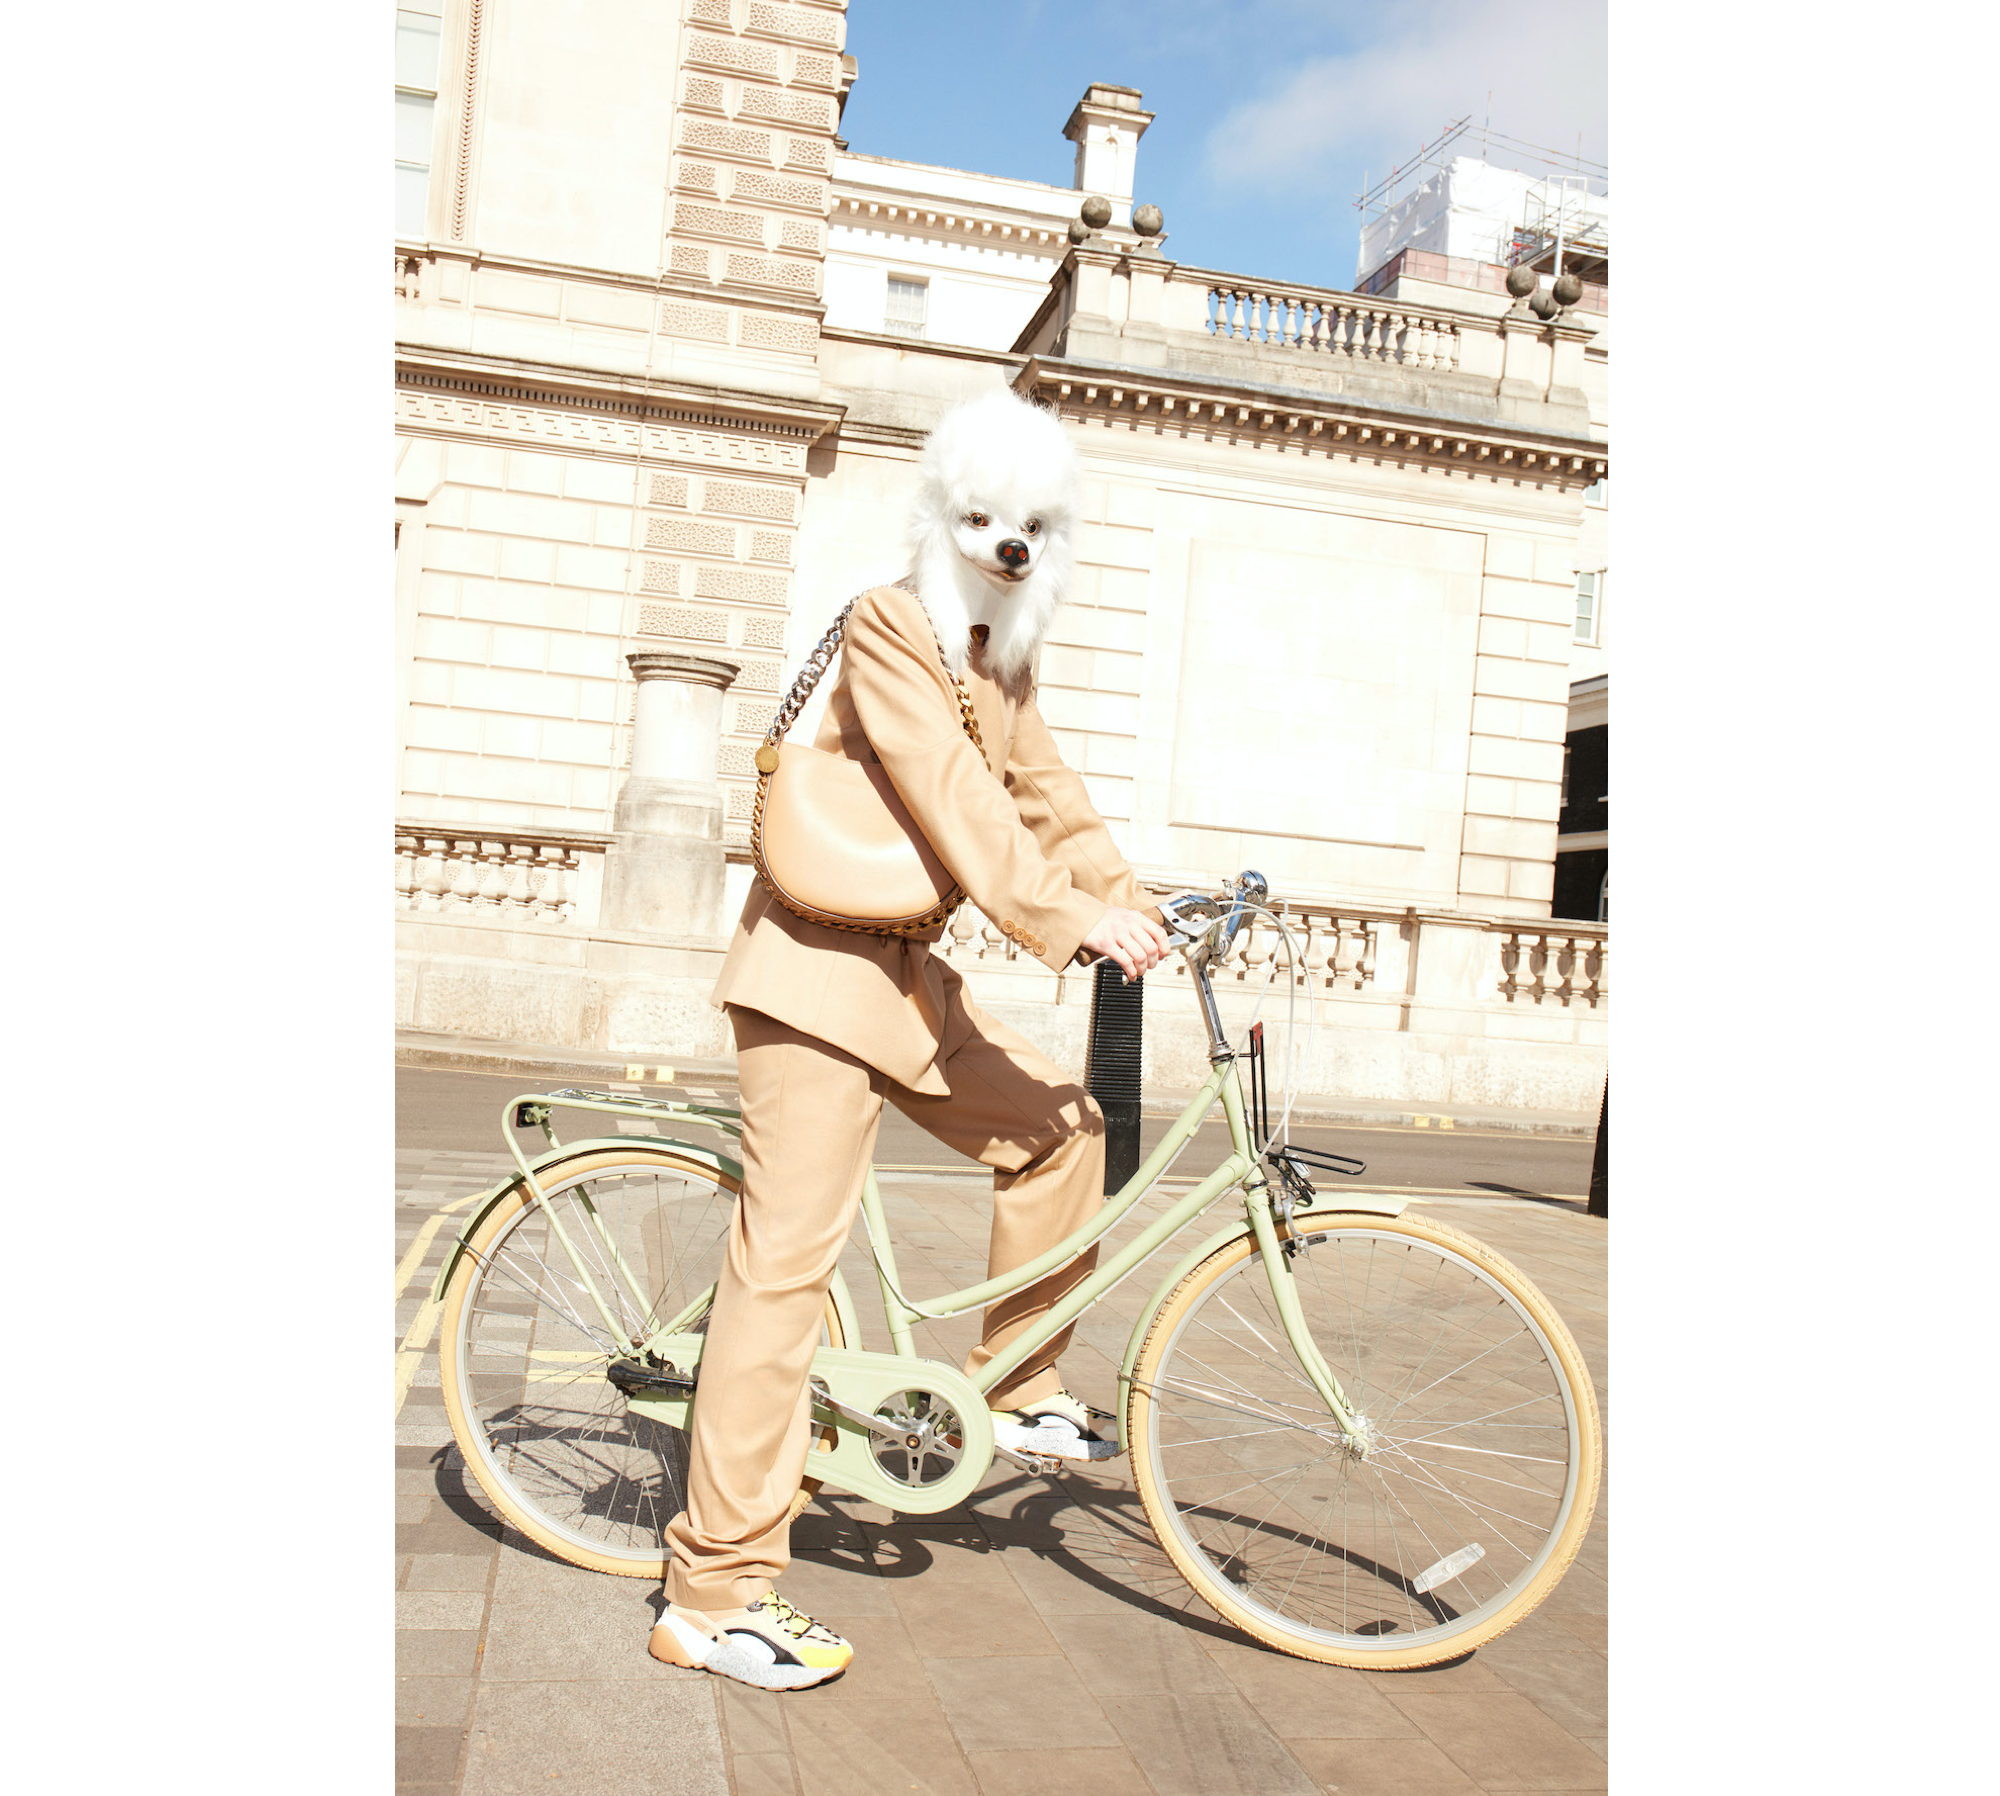 Stella McCartney directs a bizzare video shoot with models on bicycles  wearing animal heads